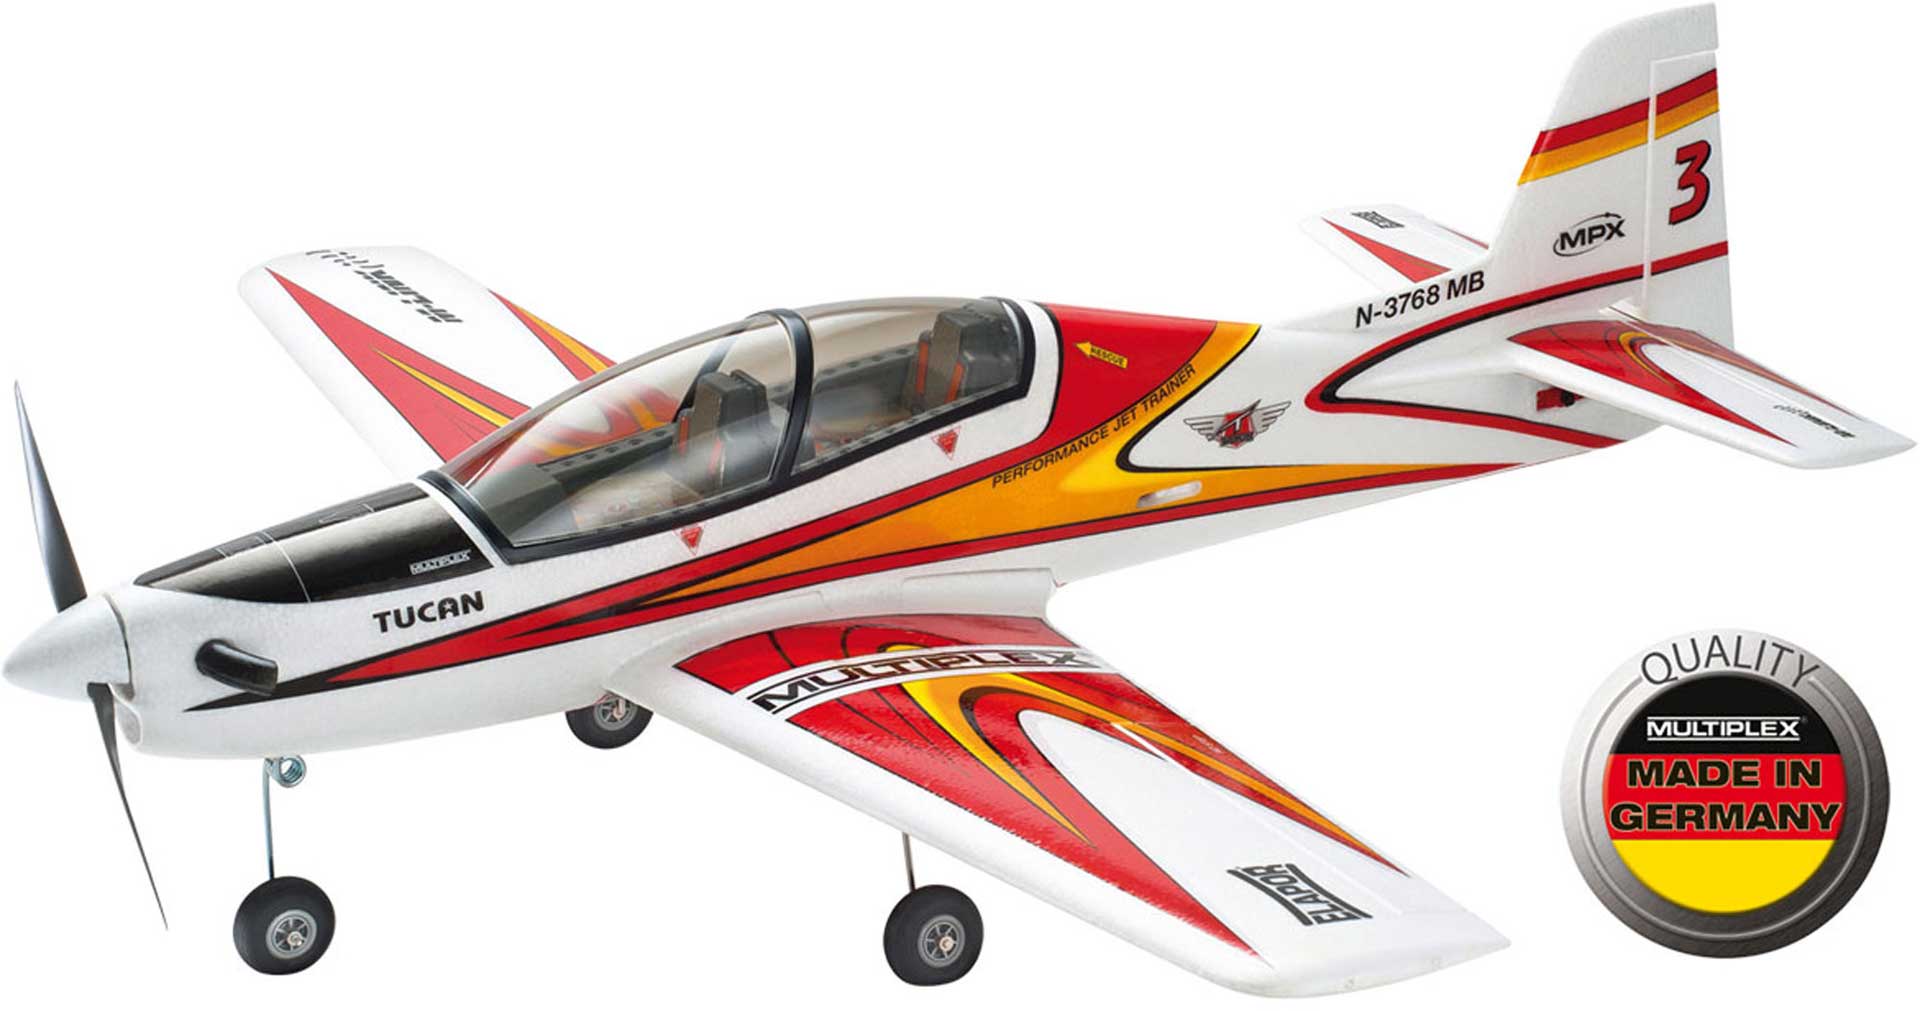 MULTIPLEX TUCAN KIT FAST WITH LANDING GEAR AND DECAL SET - buy now - Modellbau Lindinger